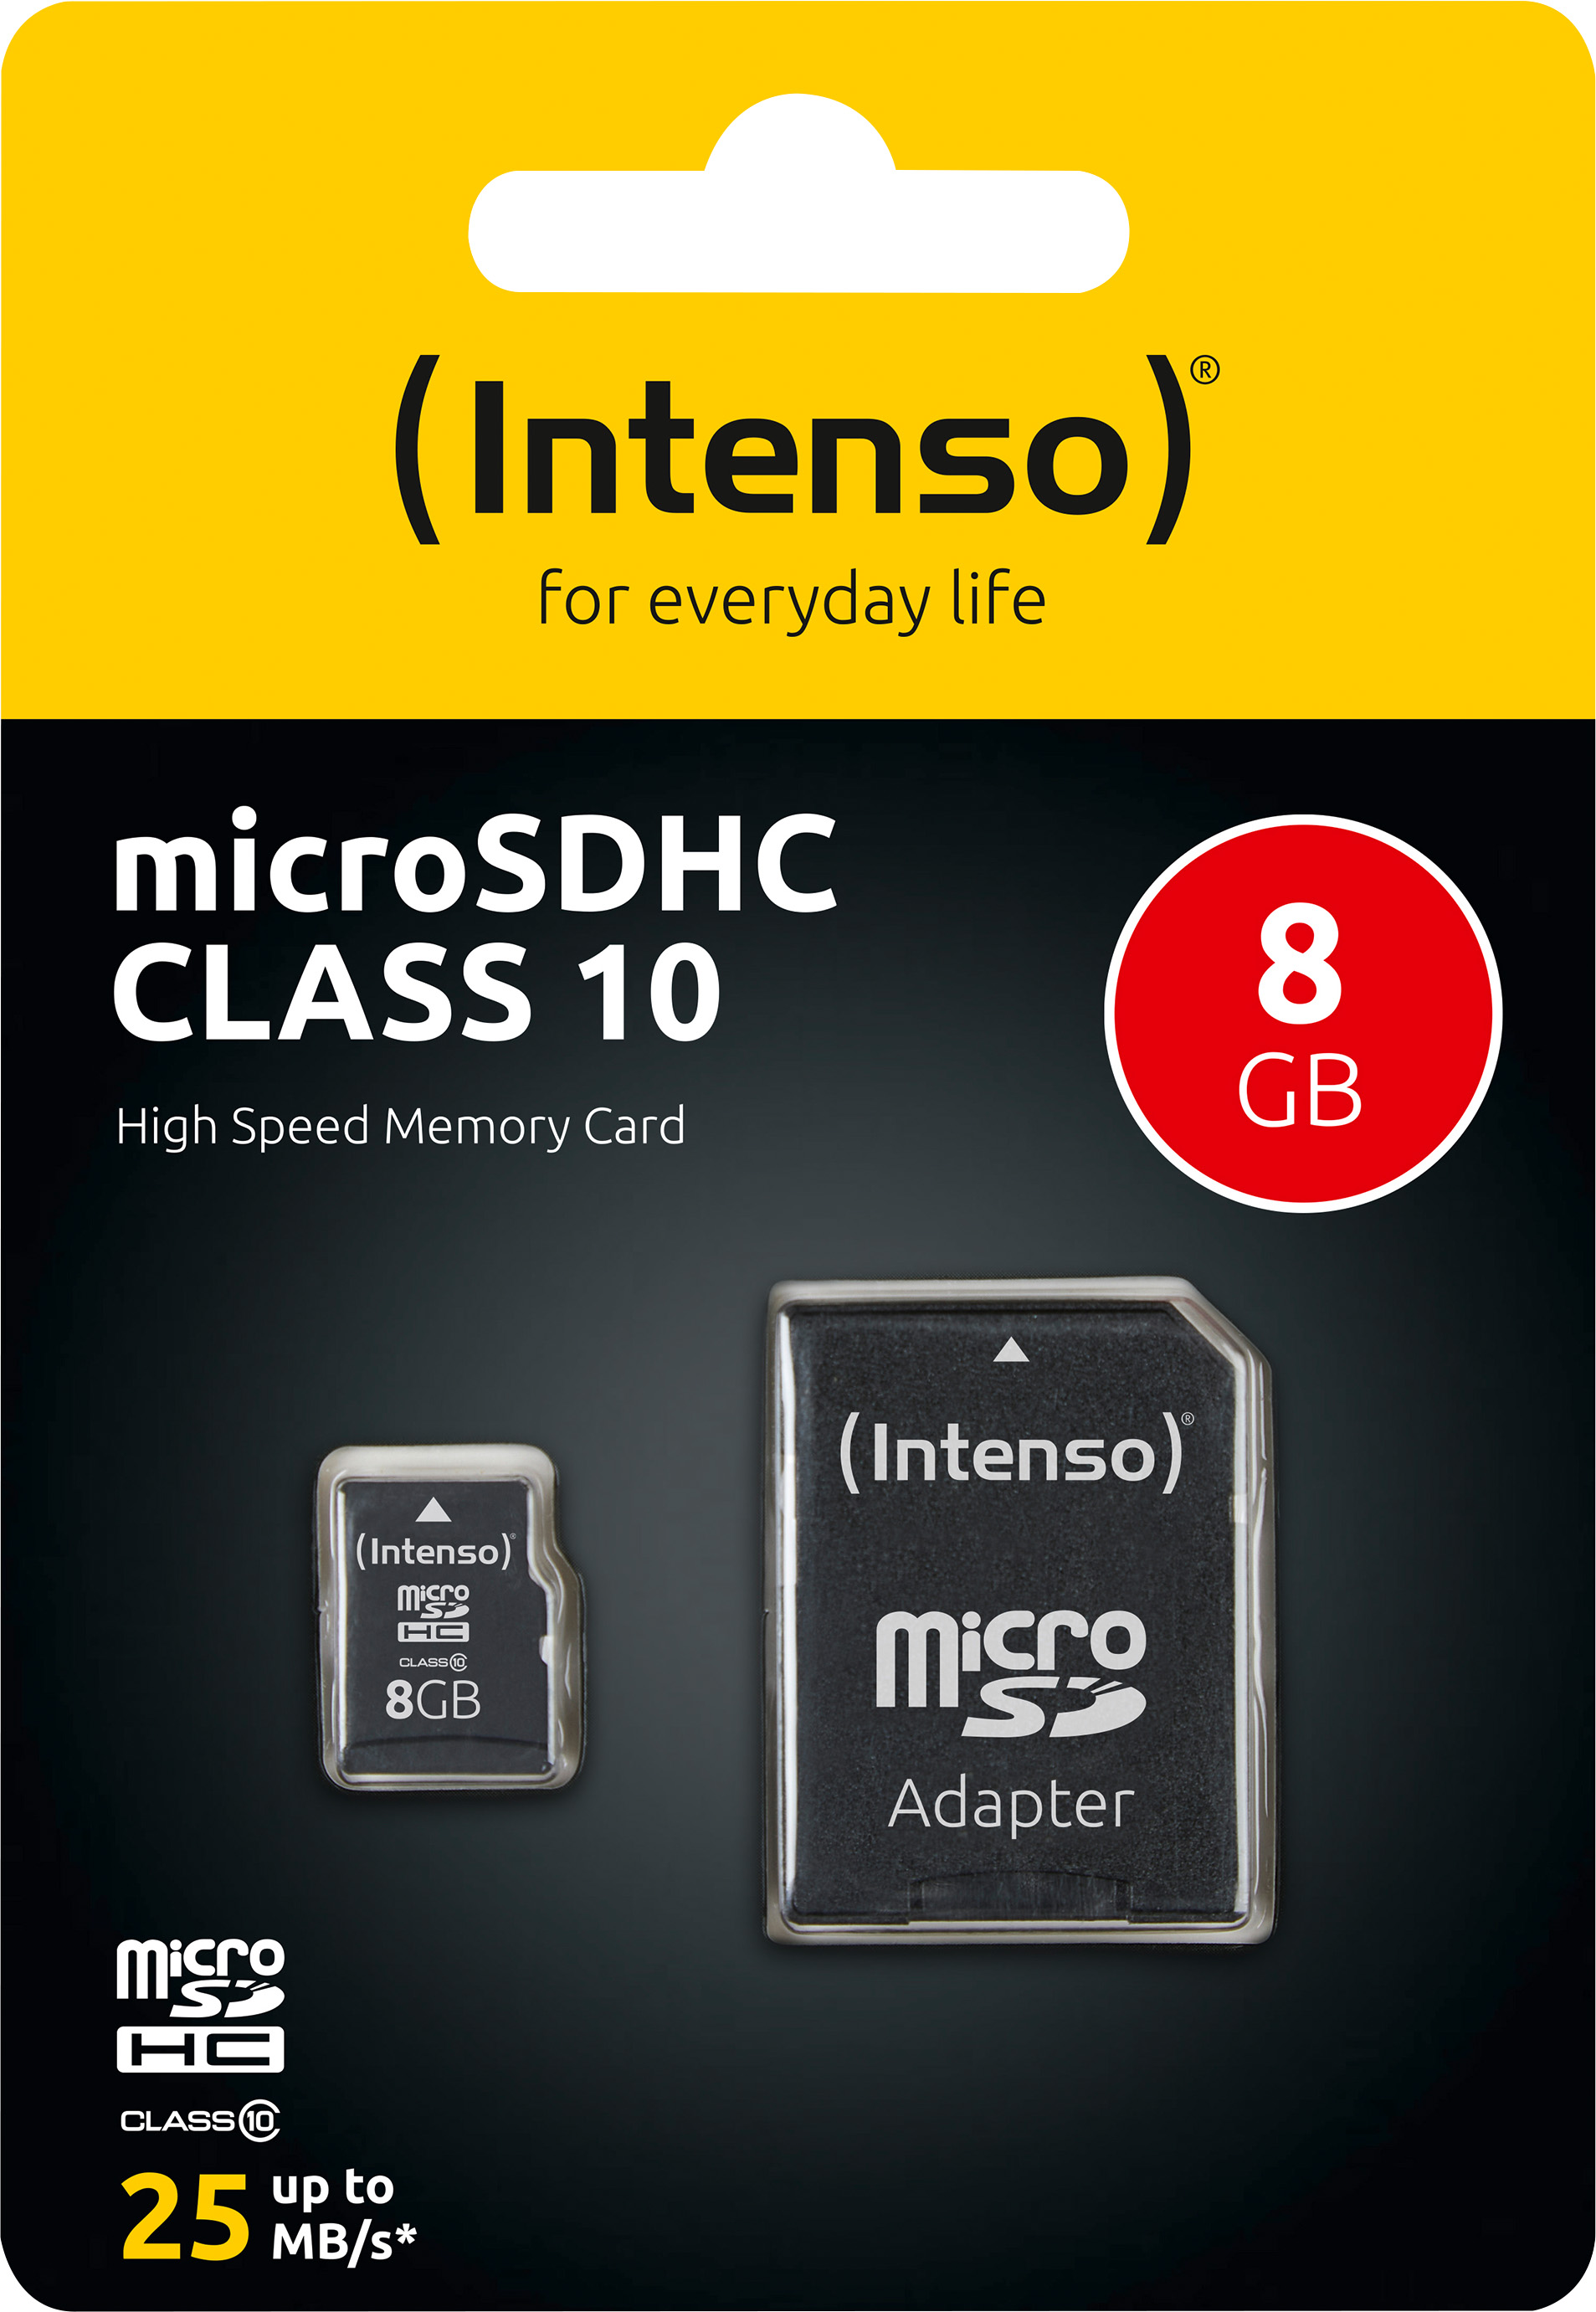 Intenso microSDHC Card 8GB, Class 10 (R) 25MB/s, (W) 10MB/s, SD-Adapter, Retail-Blister